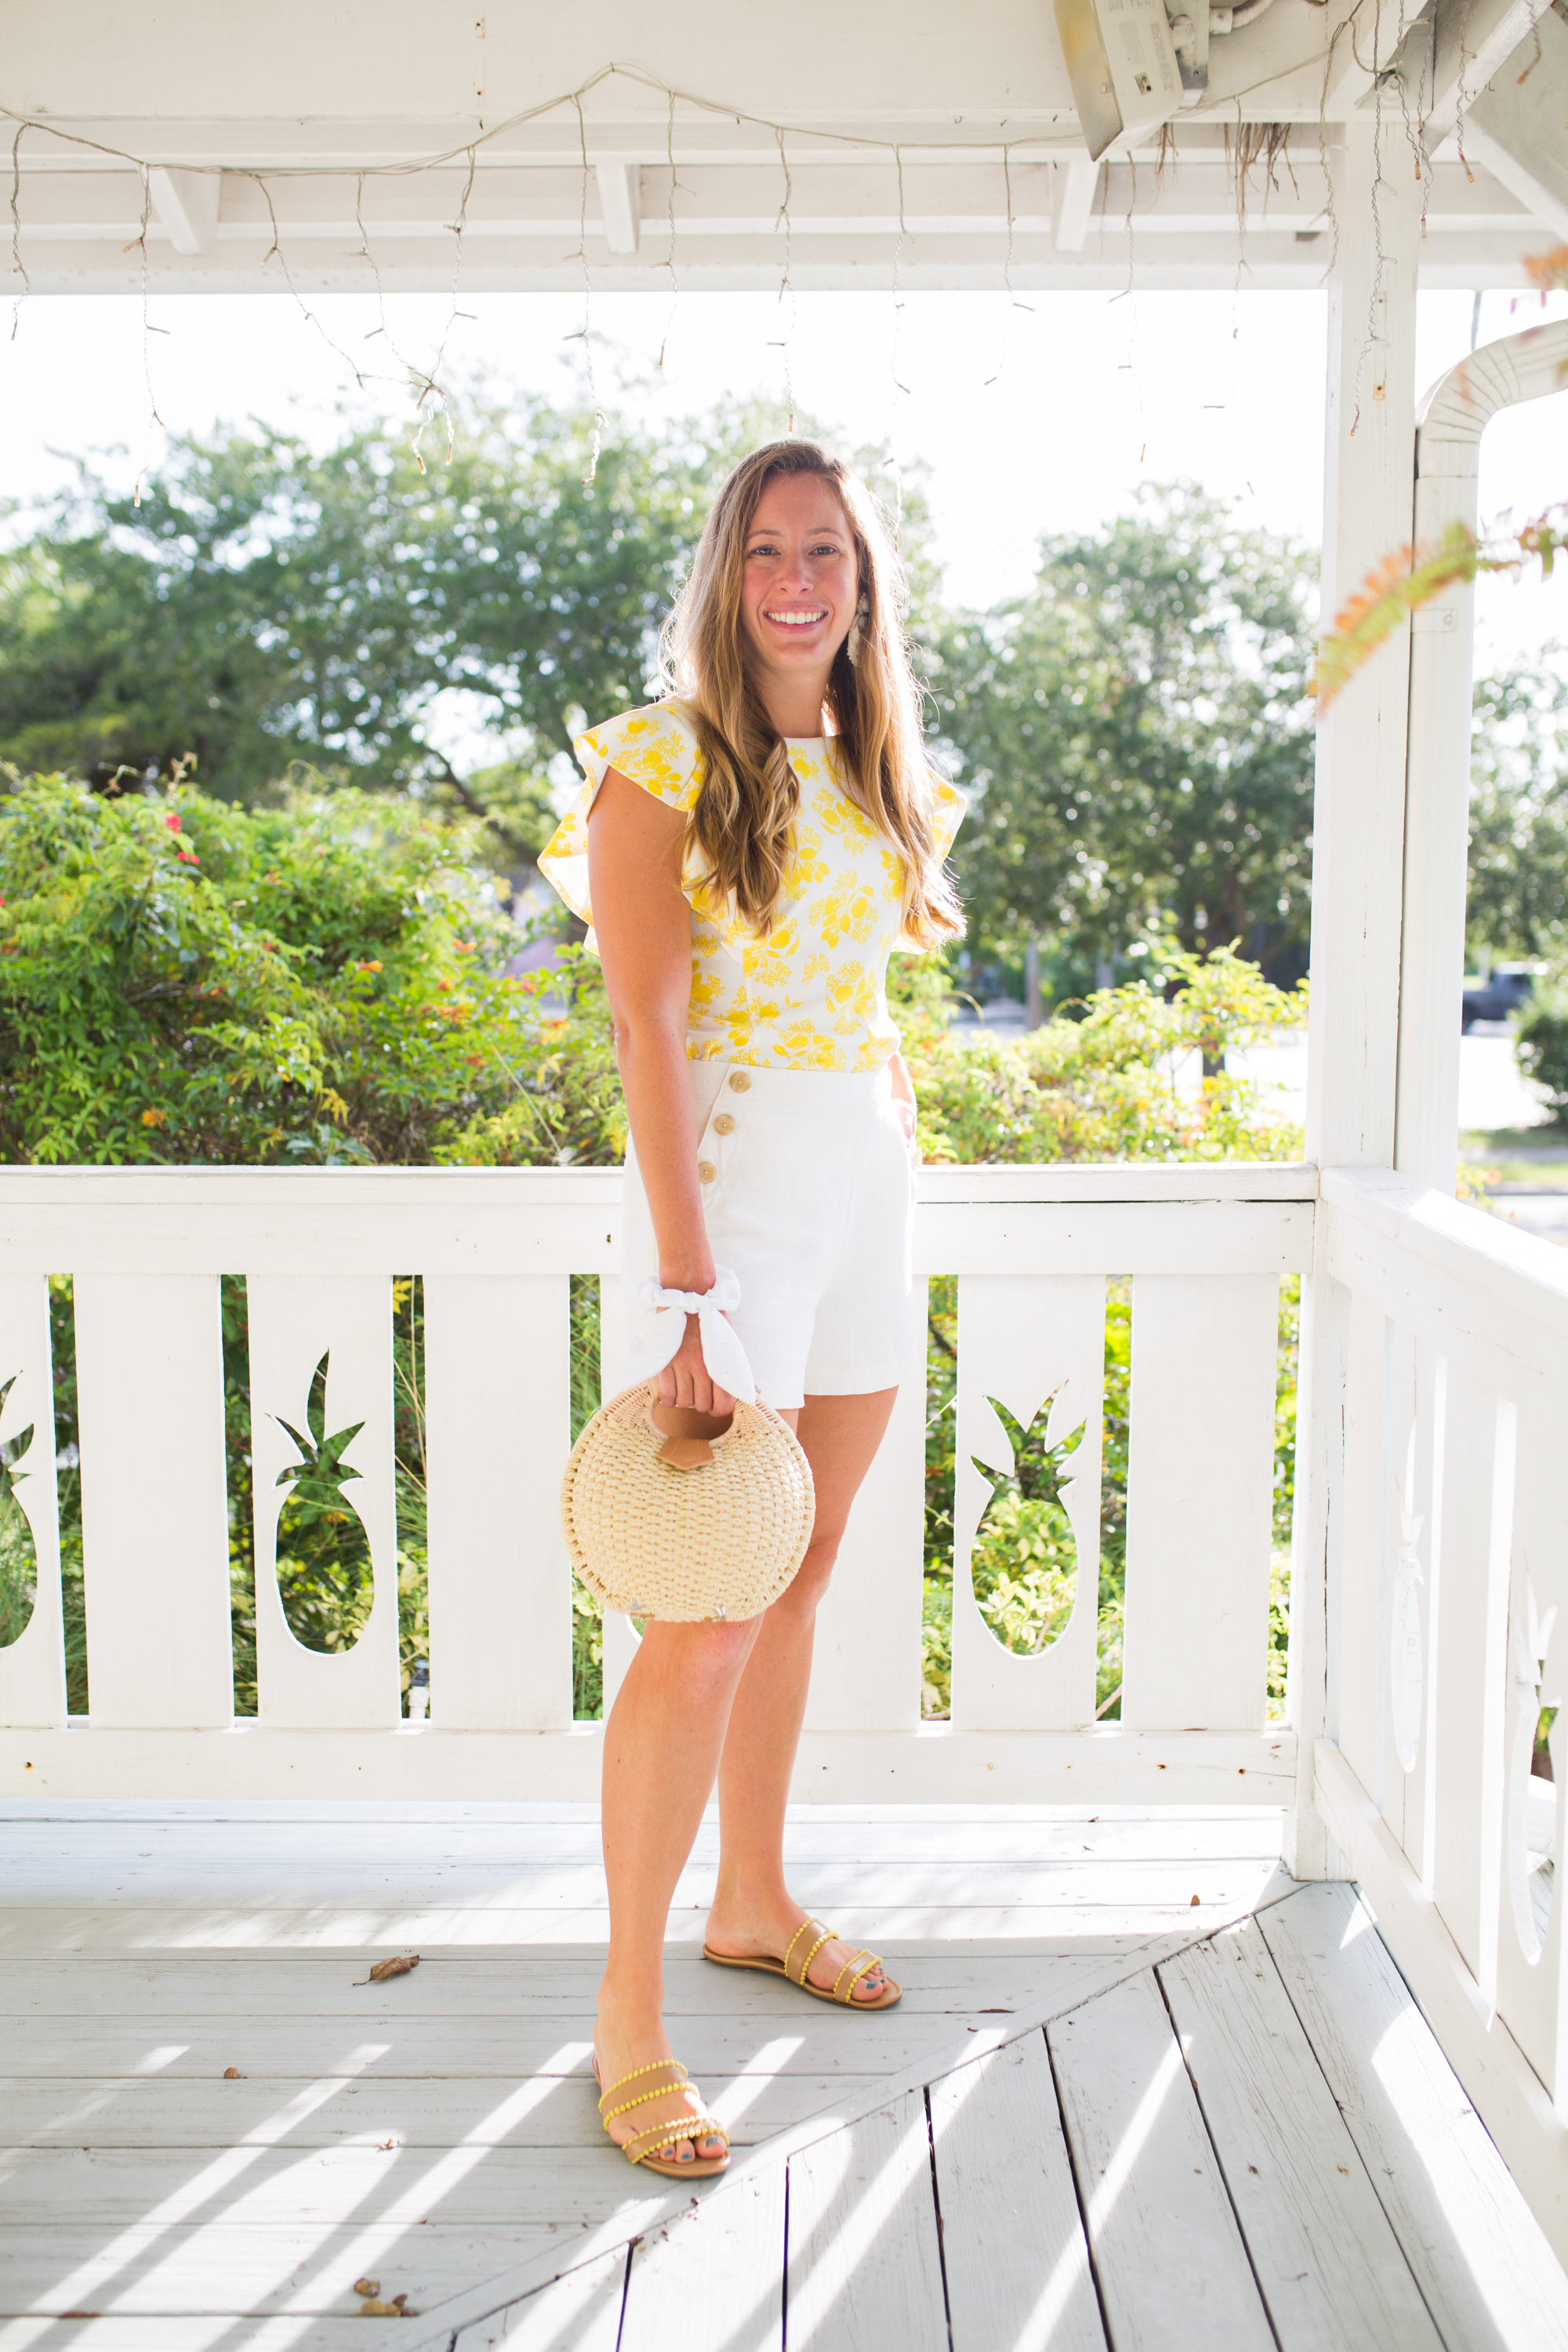 End of Summer Style / Citrus Top / Ruffle Top / Casual Summer Outfit / Classic Summer Outfit / Preppy Style / Sailor Shorts / White Shorts / Straw Bag - Sunshine Style - A Preppy Fashion and Coastal Lifestlyle Blog